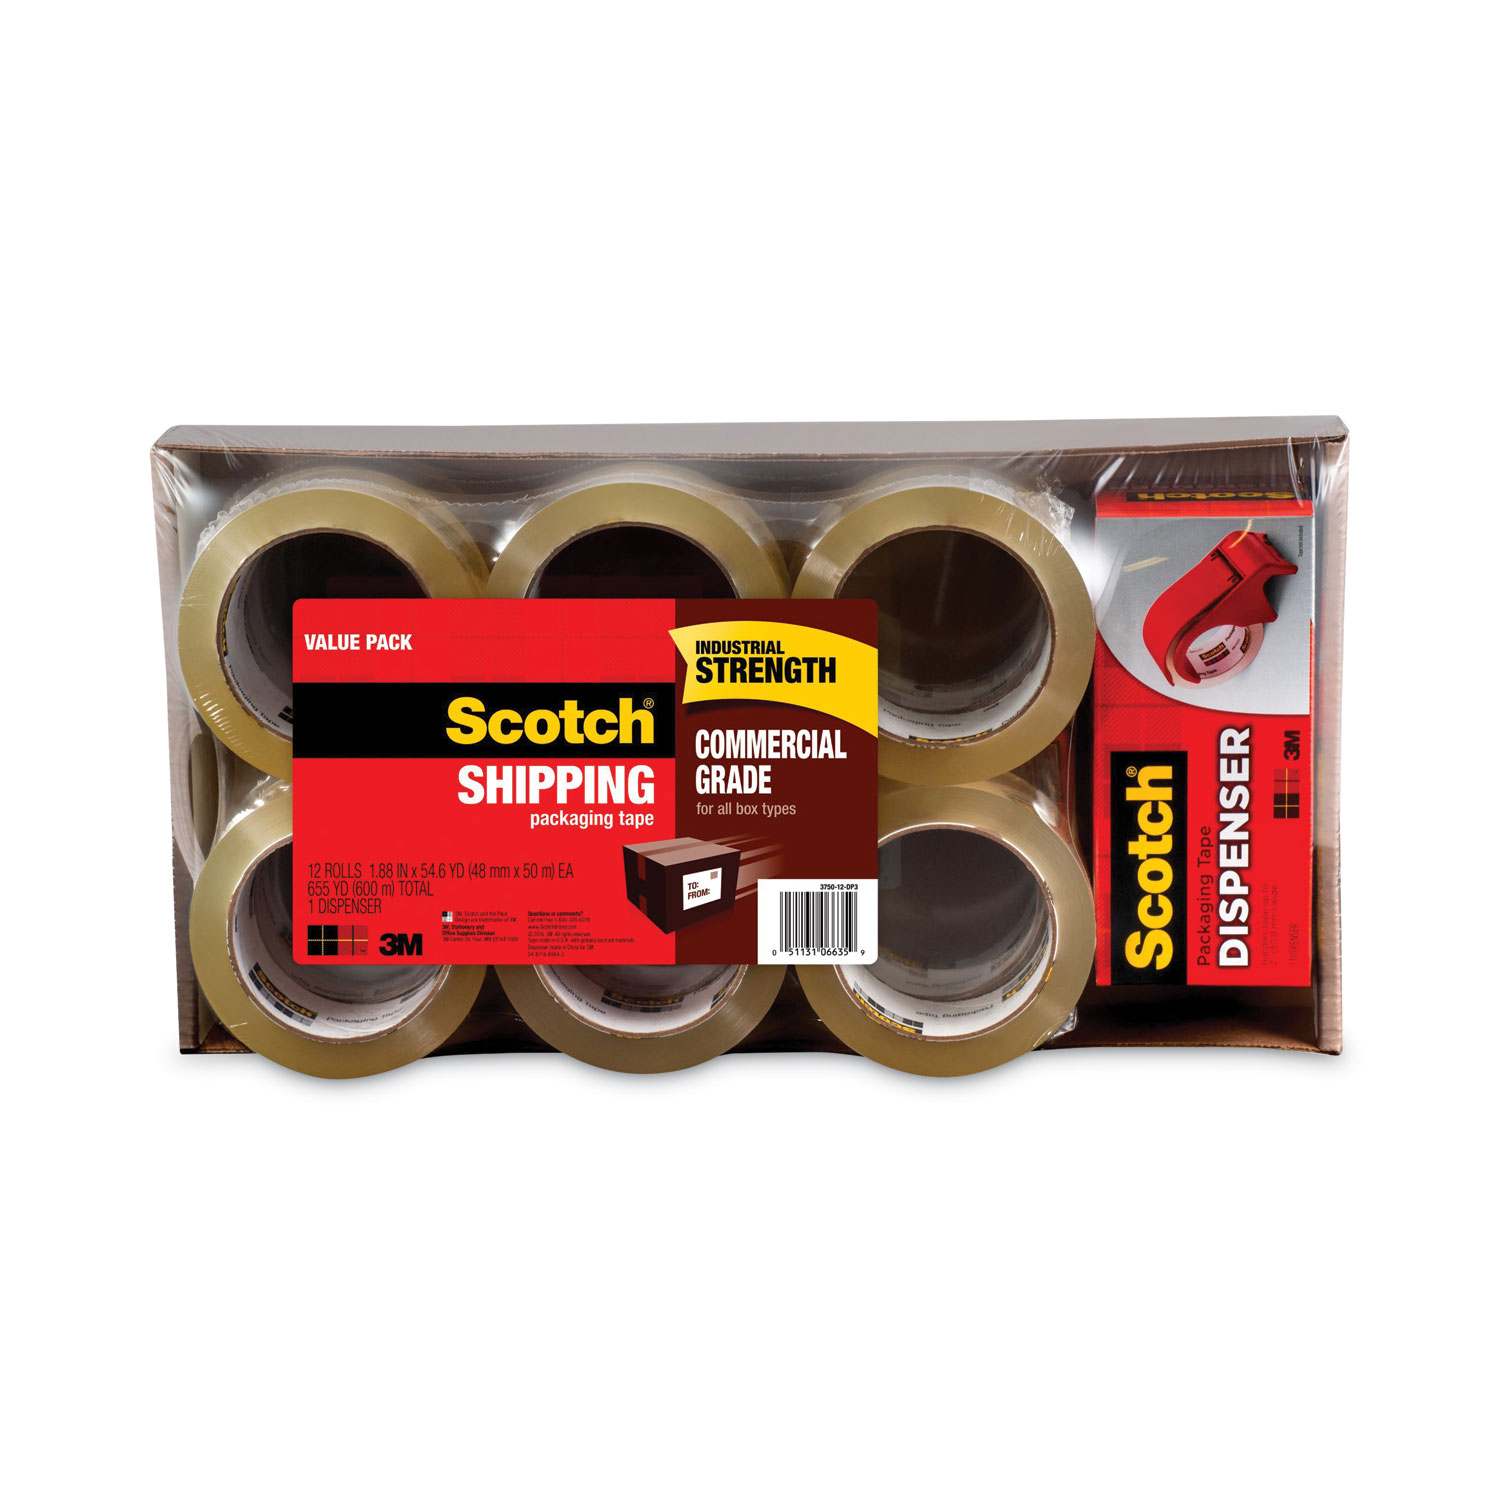 Scotch Heavy Duty Shipping Packaging Tape, 1.88 Inches x 54.6